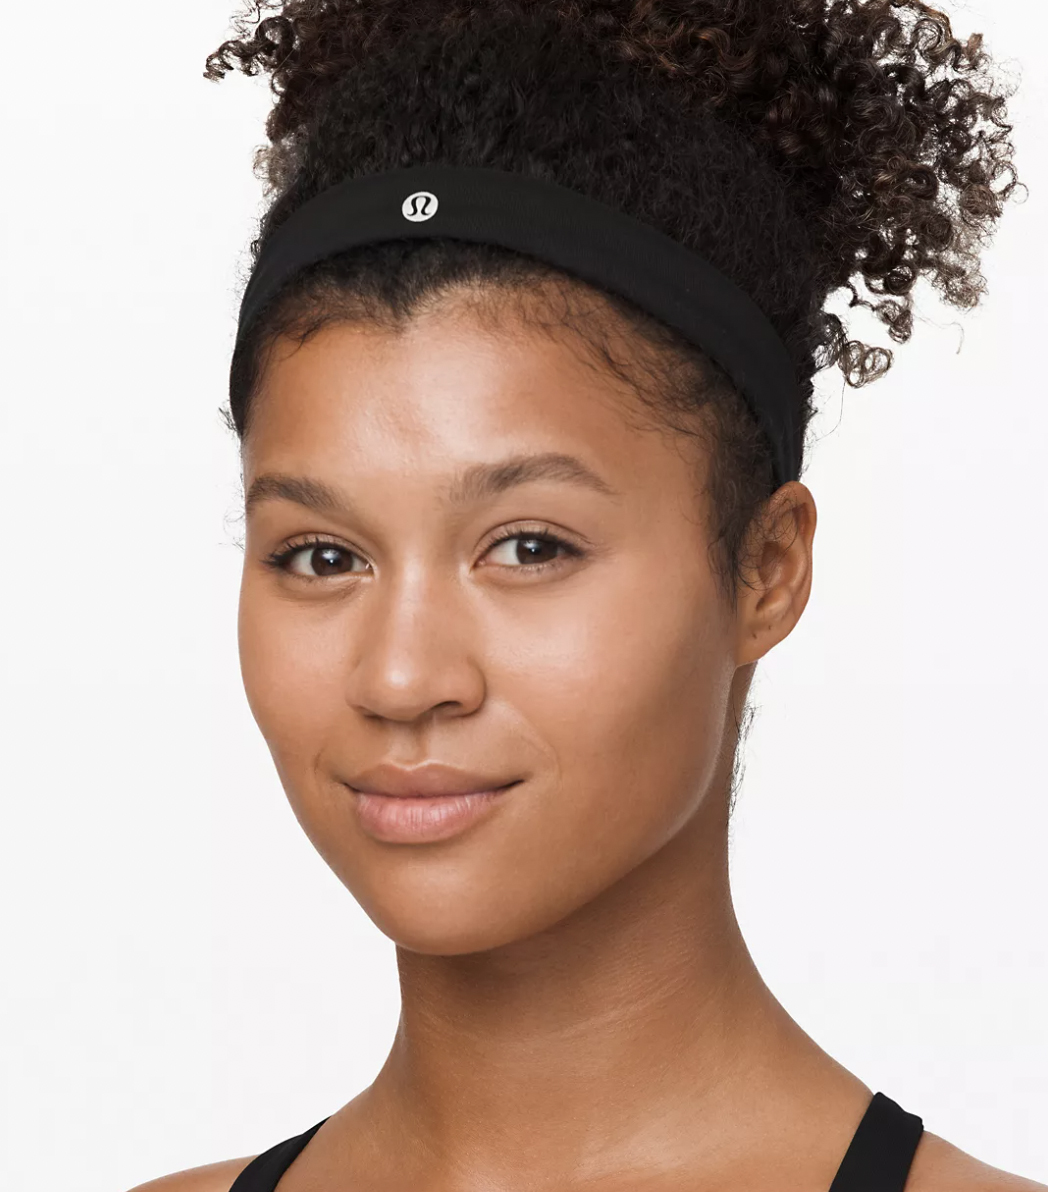 The 10 Best Workout Headbands for Women, Hands Down | TheThirty